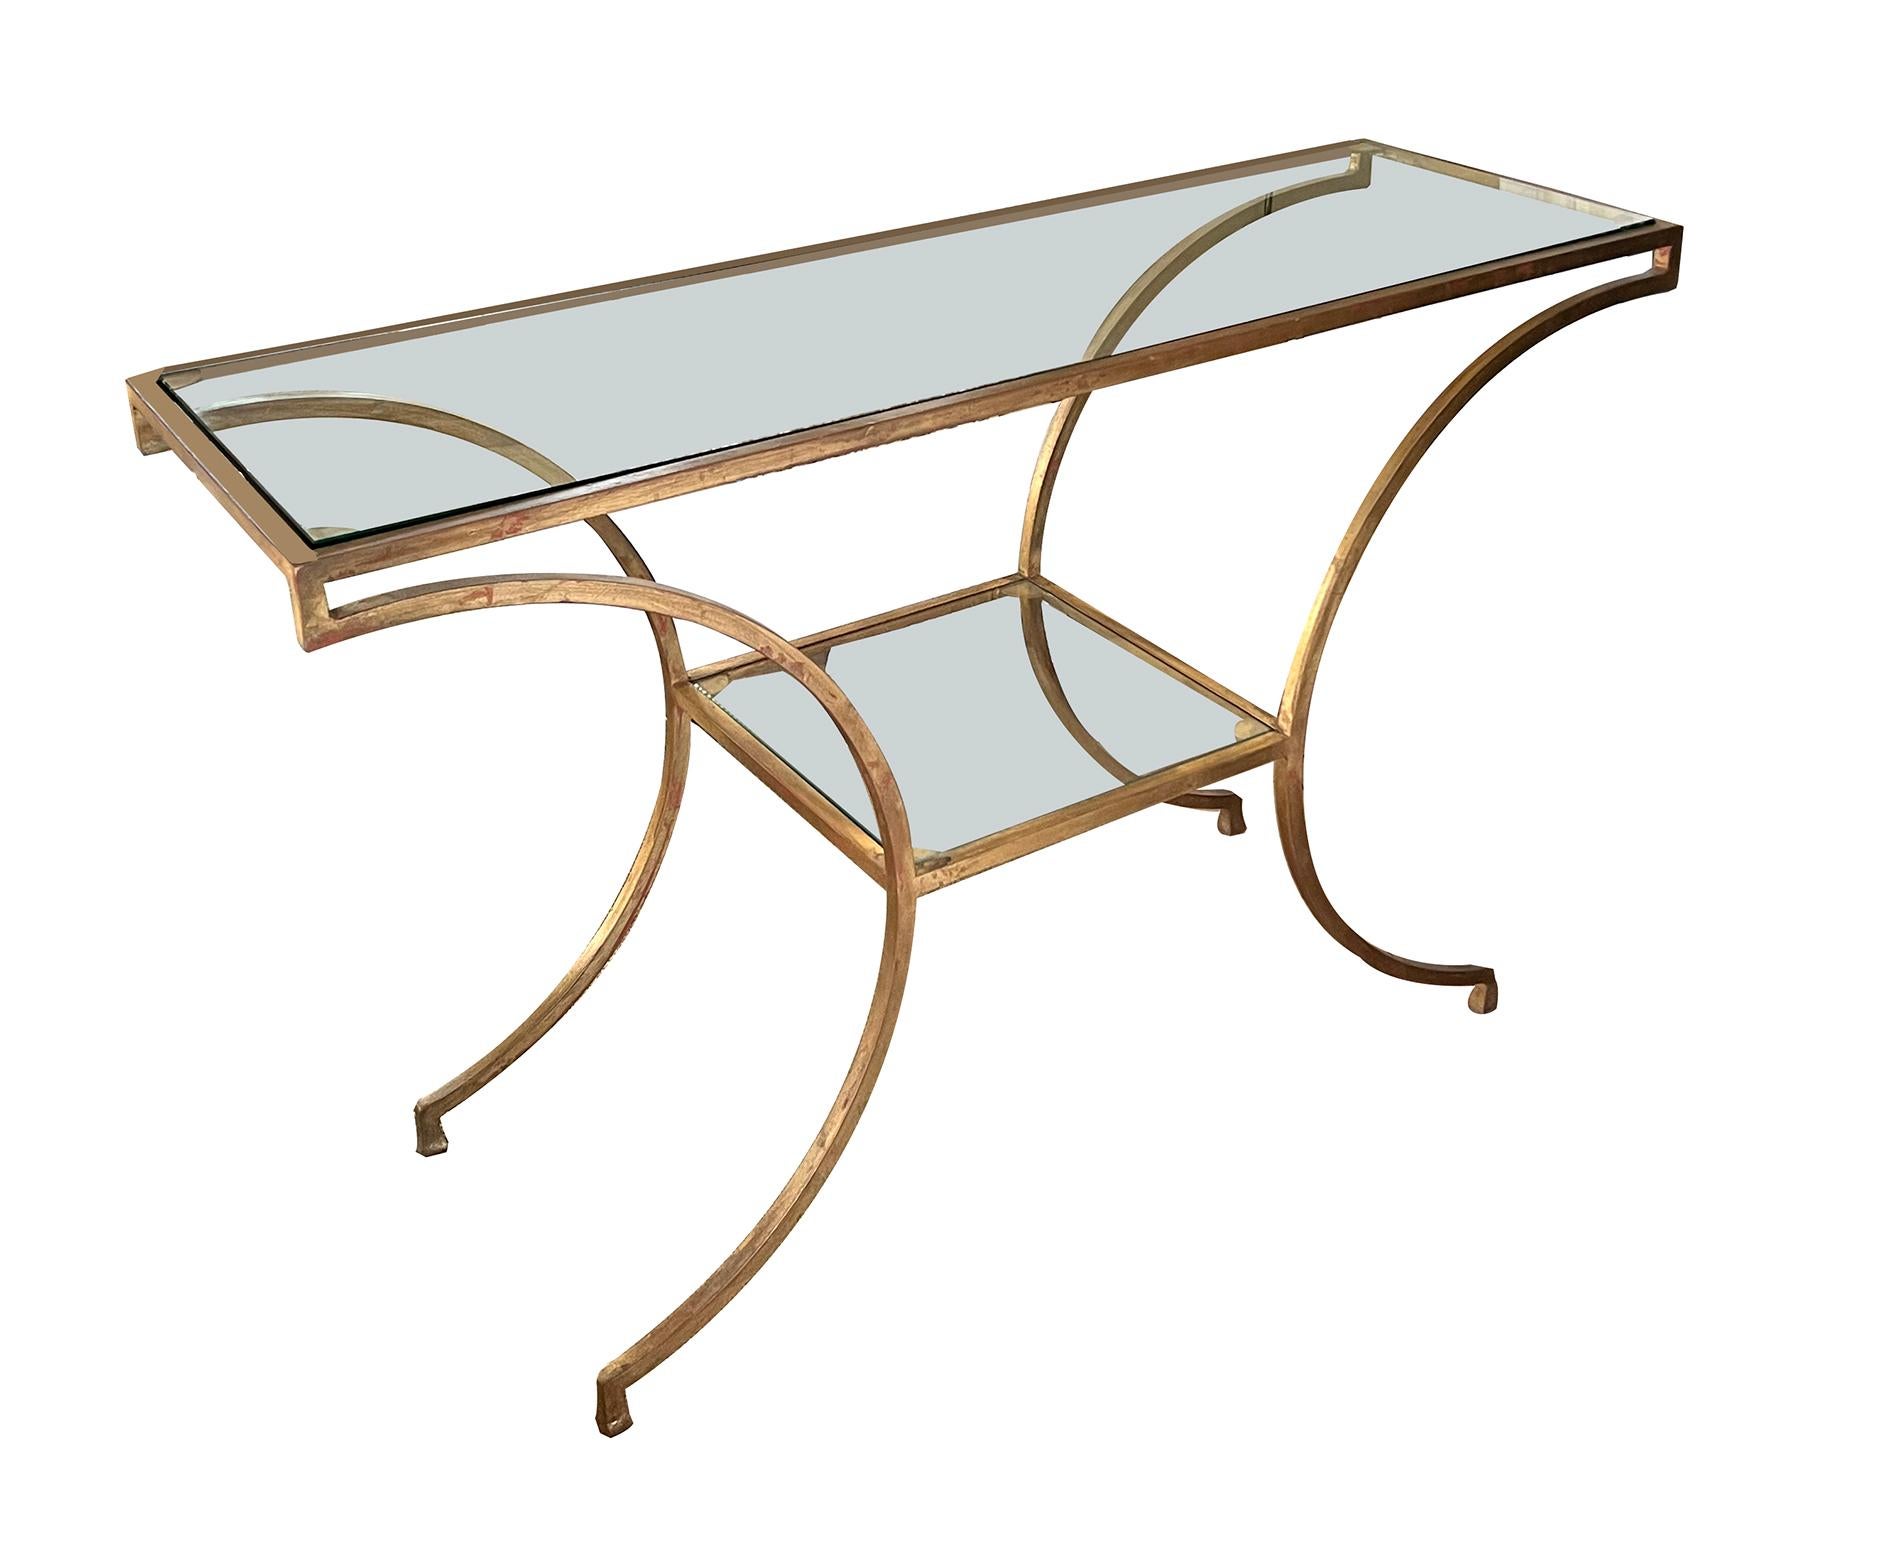 the inset rectangular glass top within a gilt-metal frame; raised on dramatically splayed supports ending in short graduated quadrangular feet all joined by a lower inset glass shelf